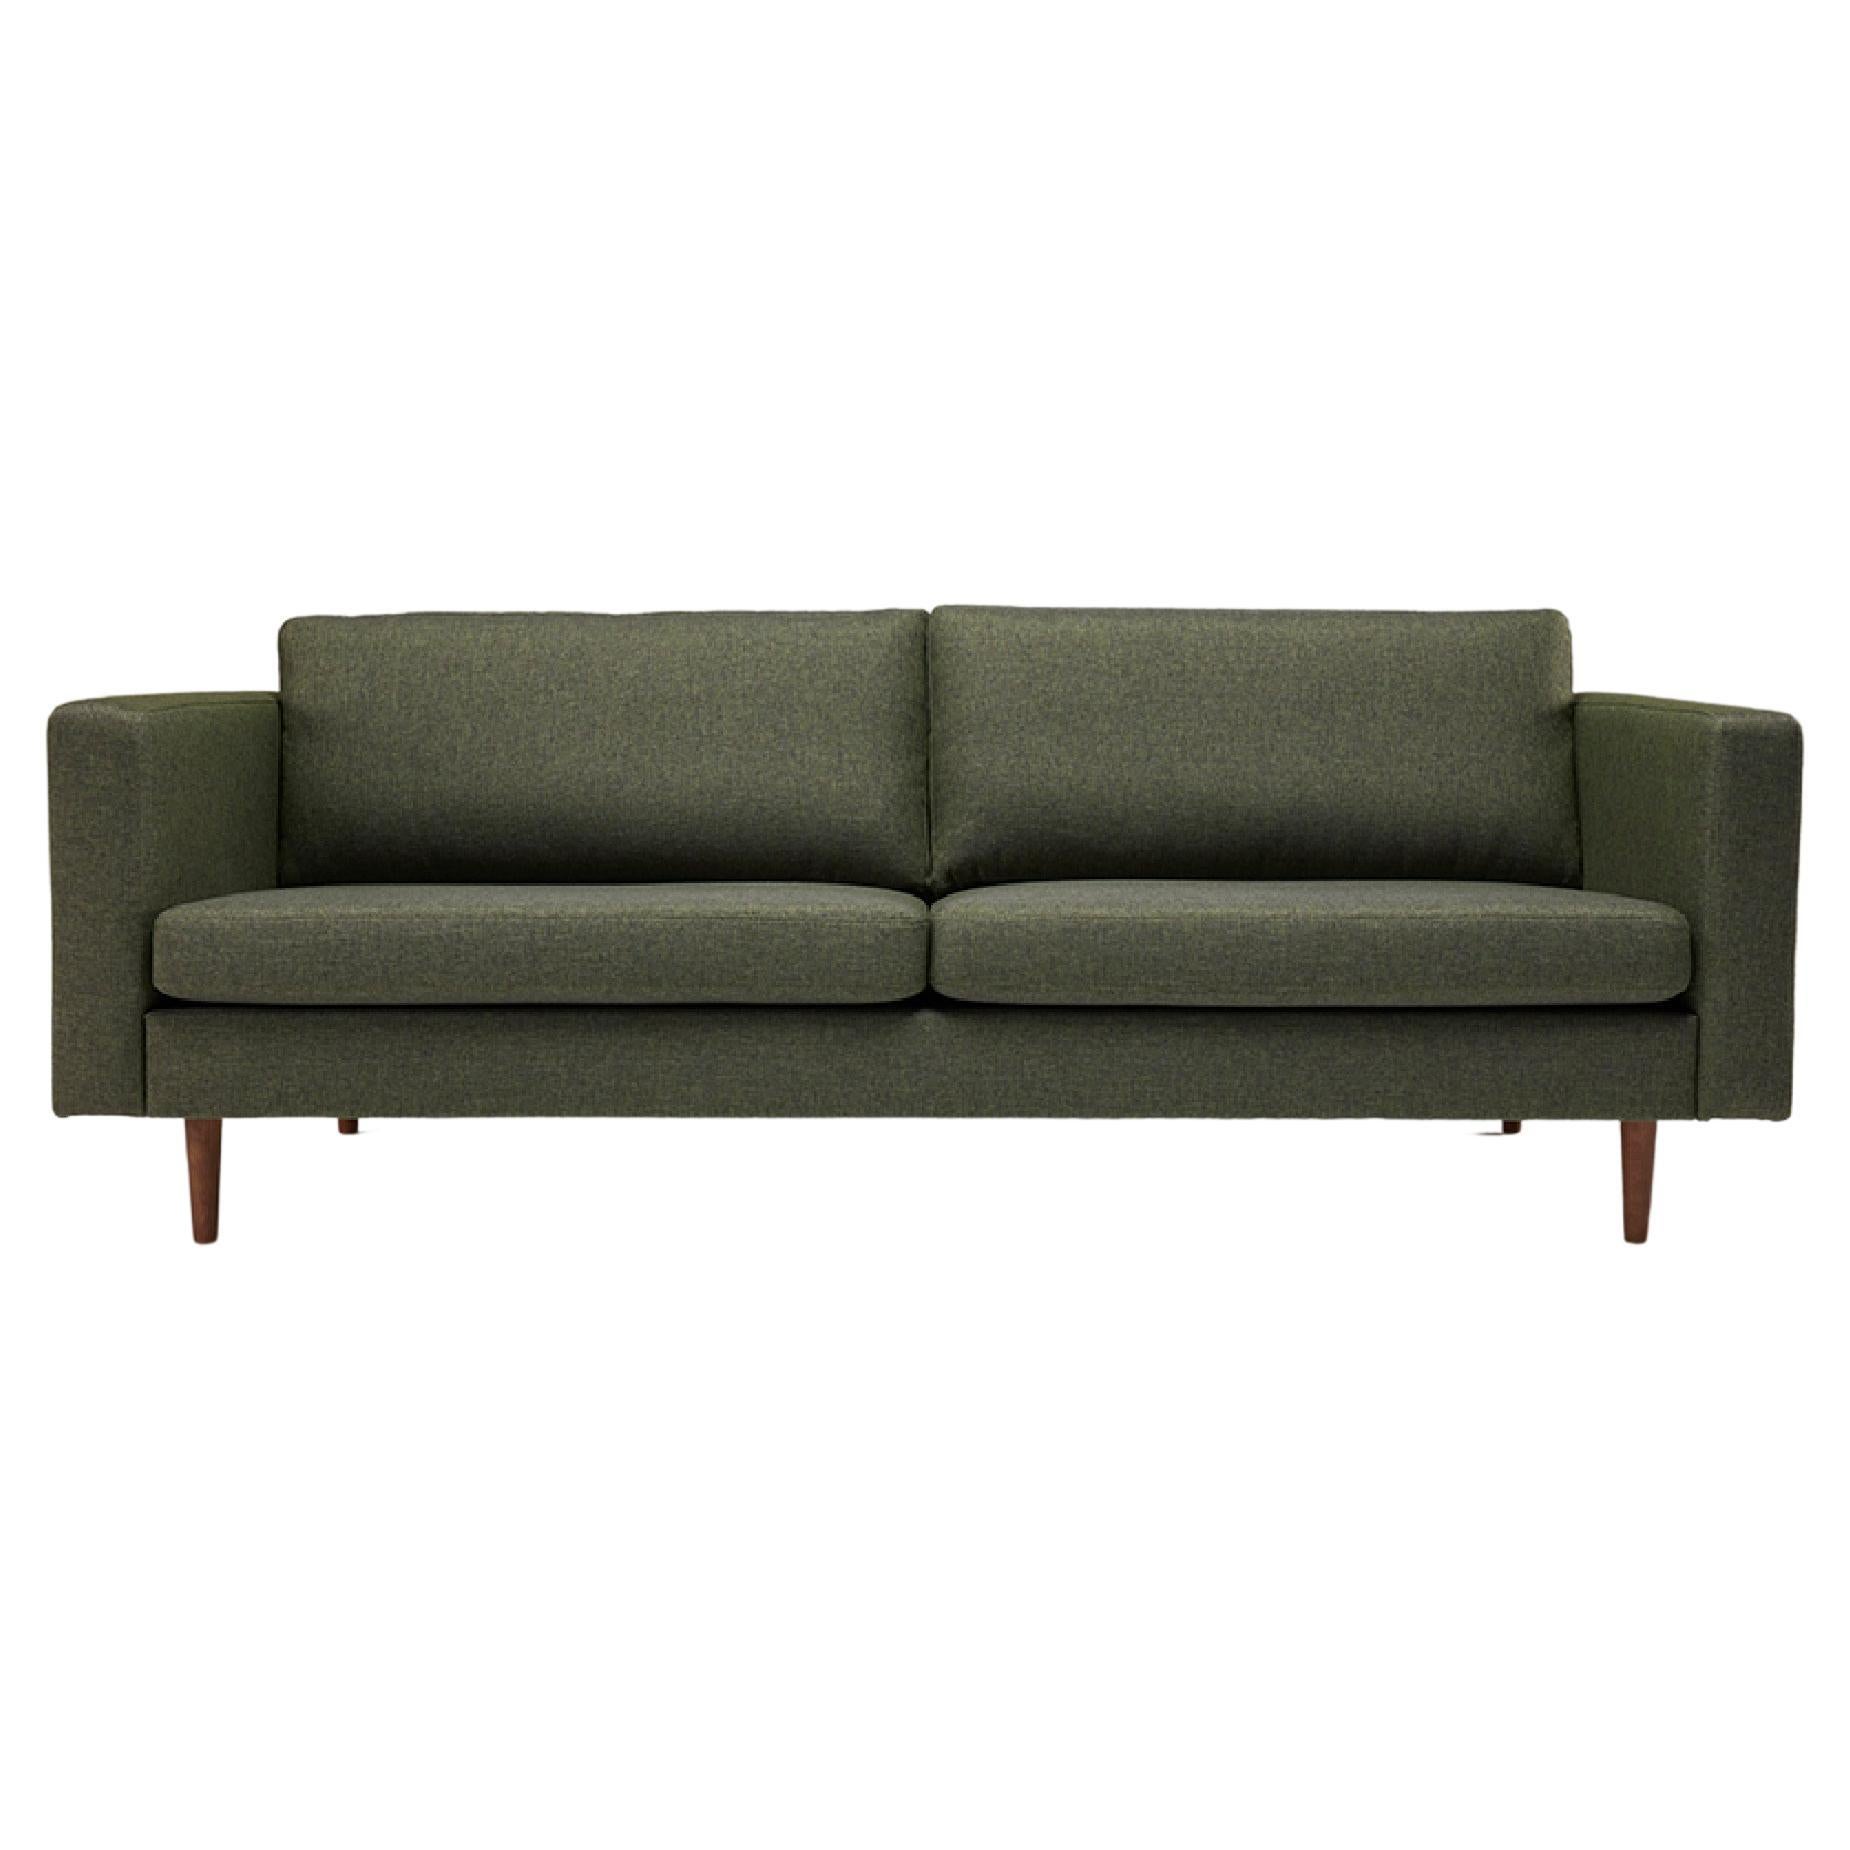 Hayche Clasico 3 Seater Sofa - Green, UK, Made to Order For Sale